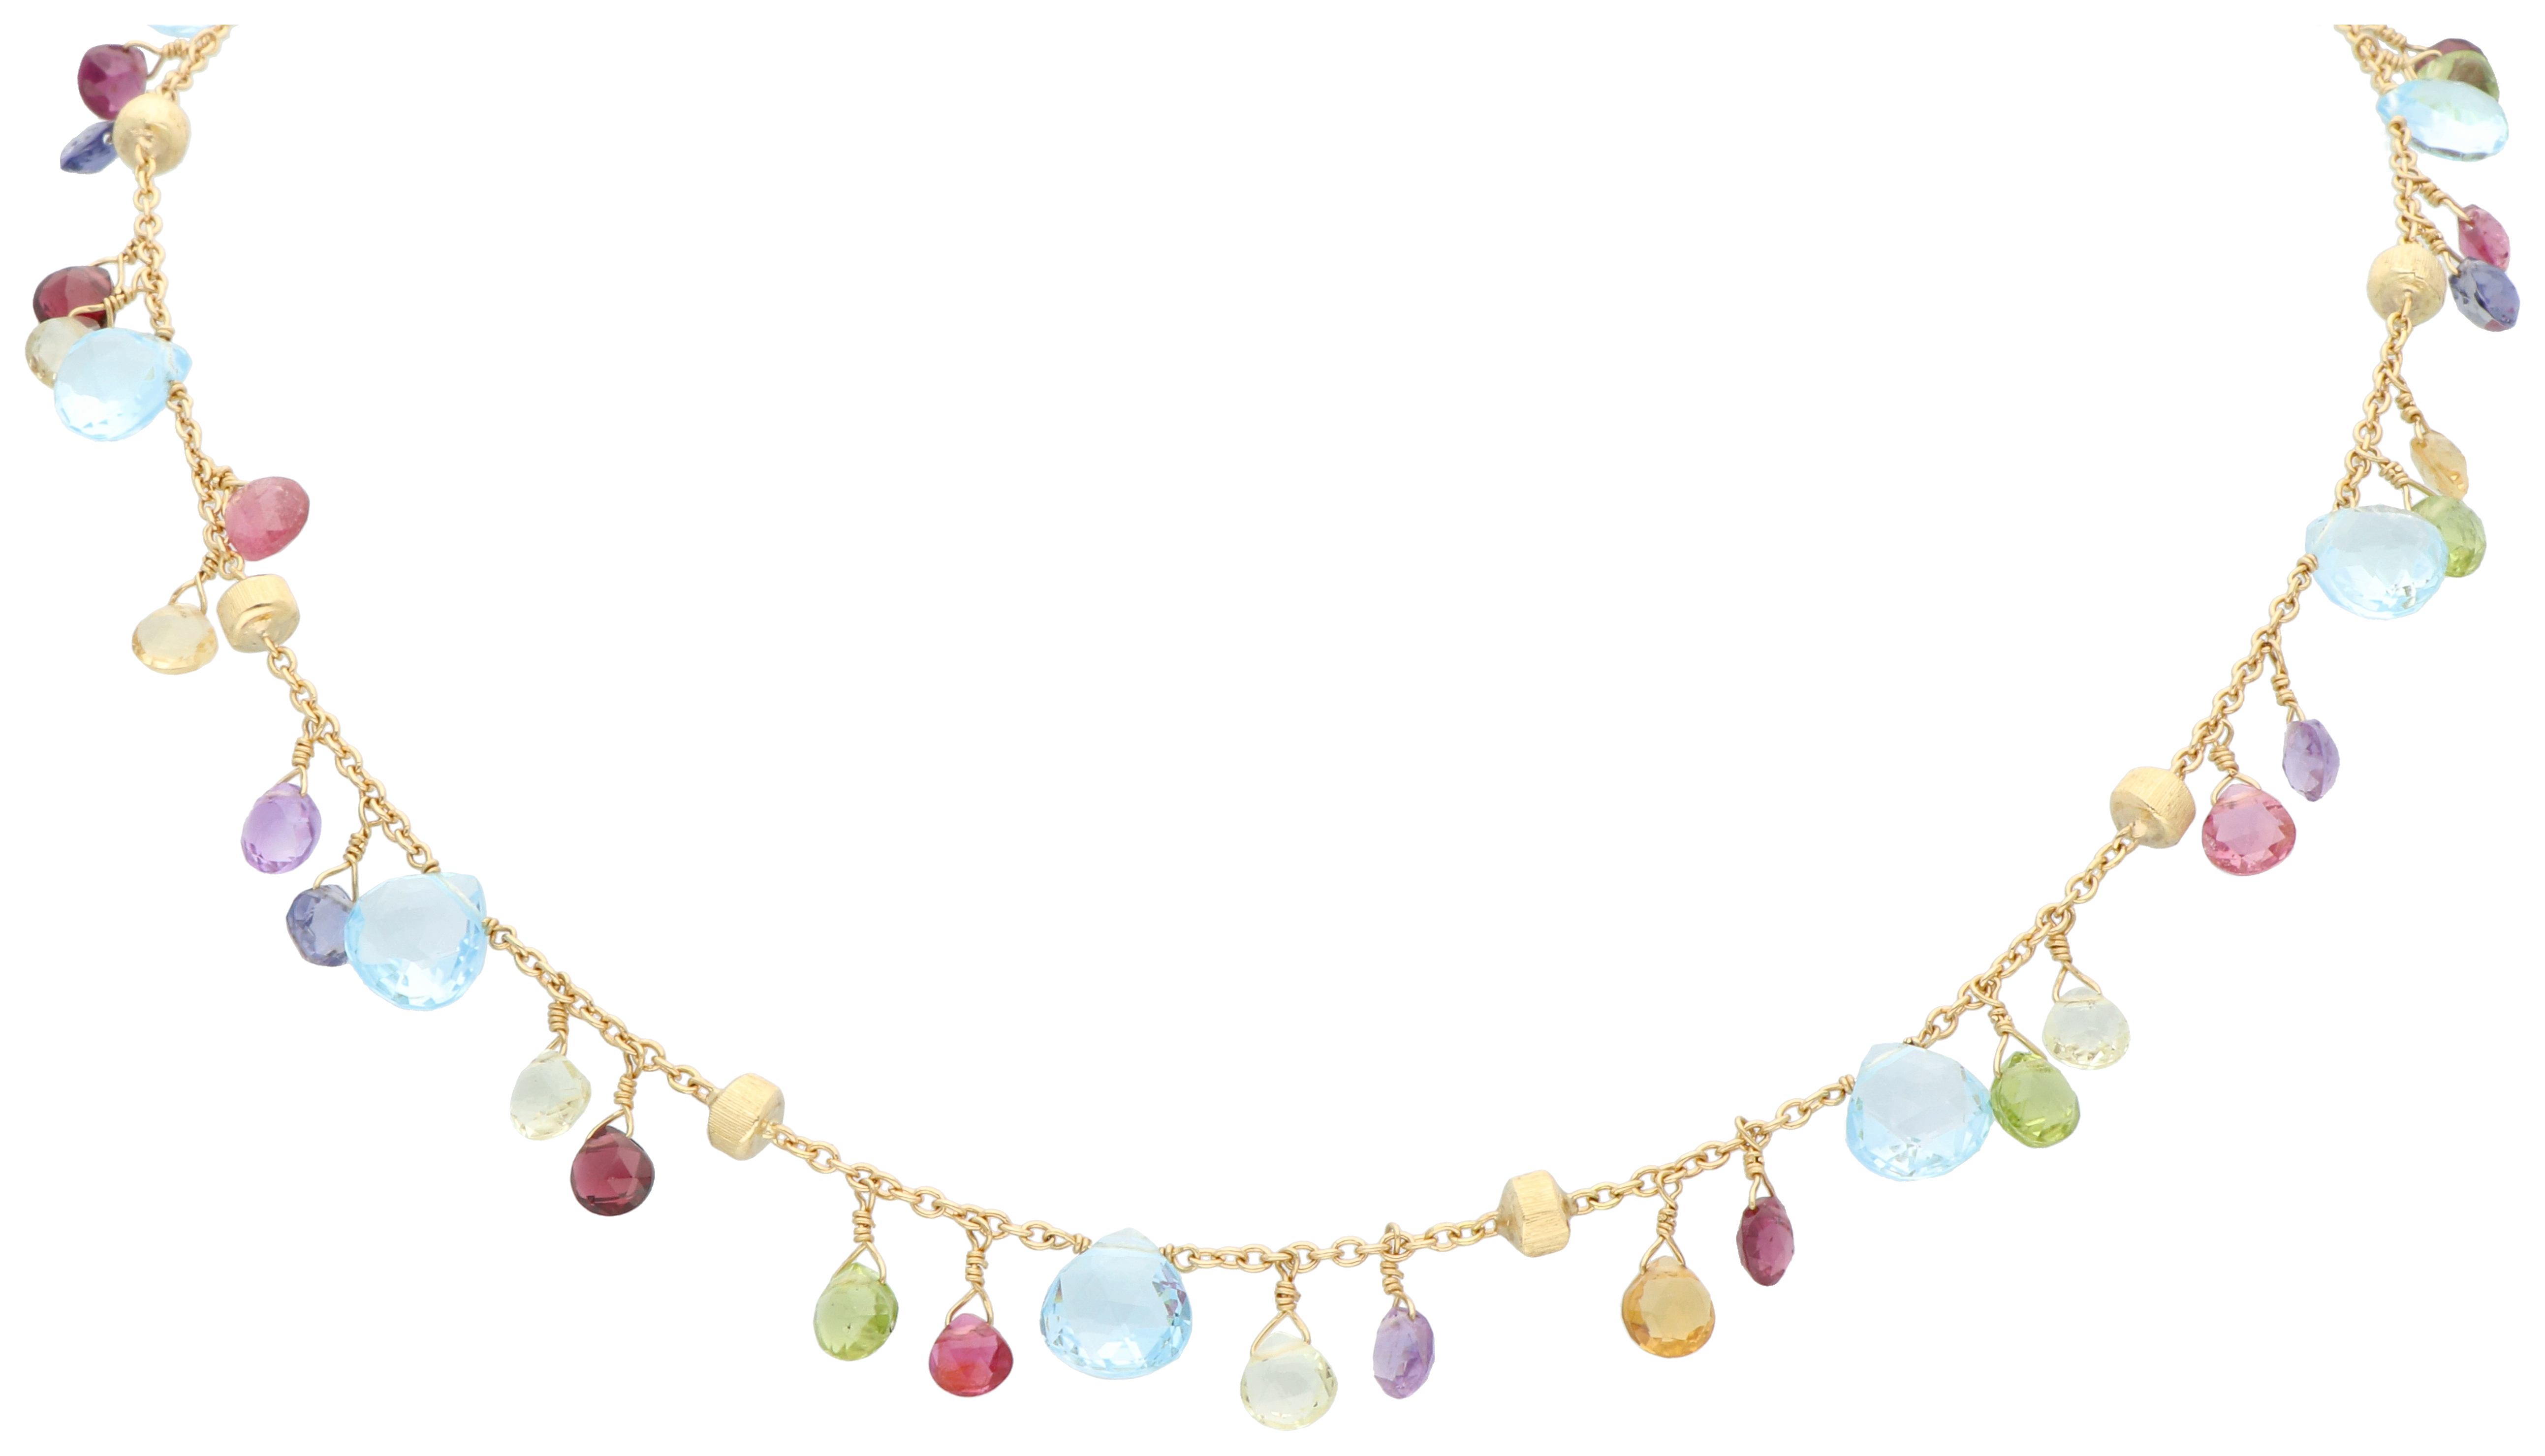 No Reserve - Marco Bicego 'Paradise' collection 18K yellow gold necklace with mix of gemstones